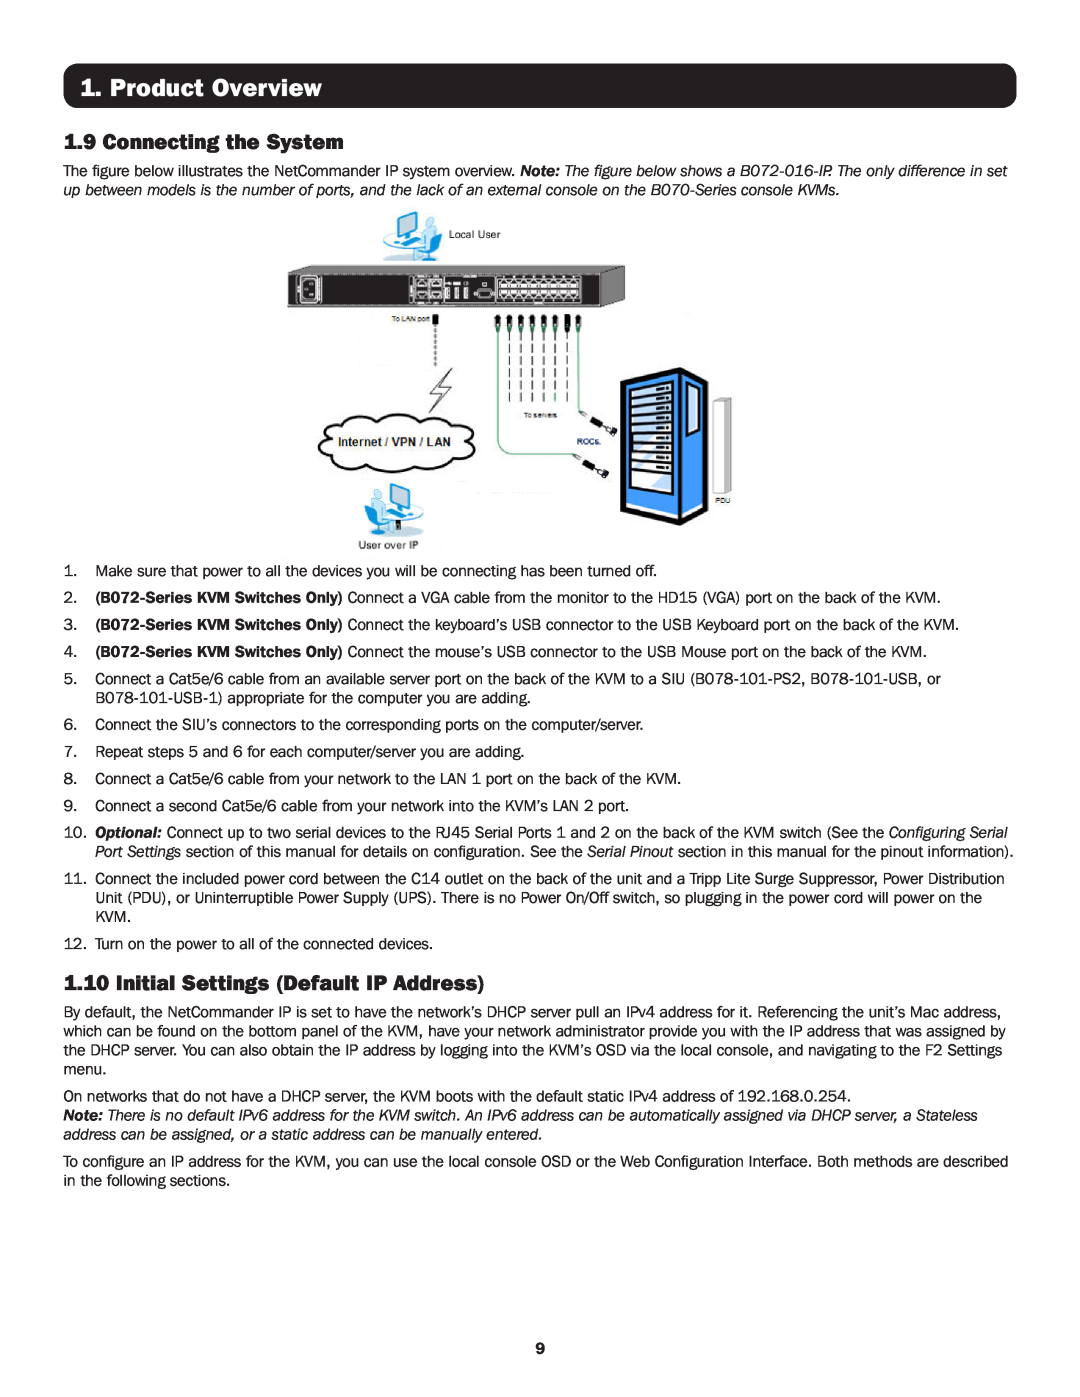 Tripp Lite B070-016-19-IP, B072-016-IP Connecting the System, Initial Settings Default IP Address, Product Overview 